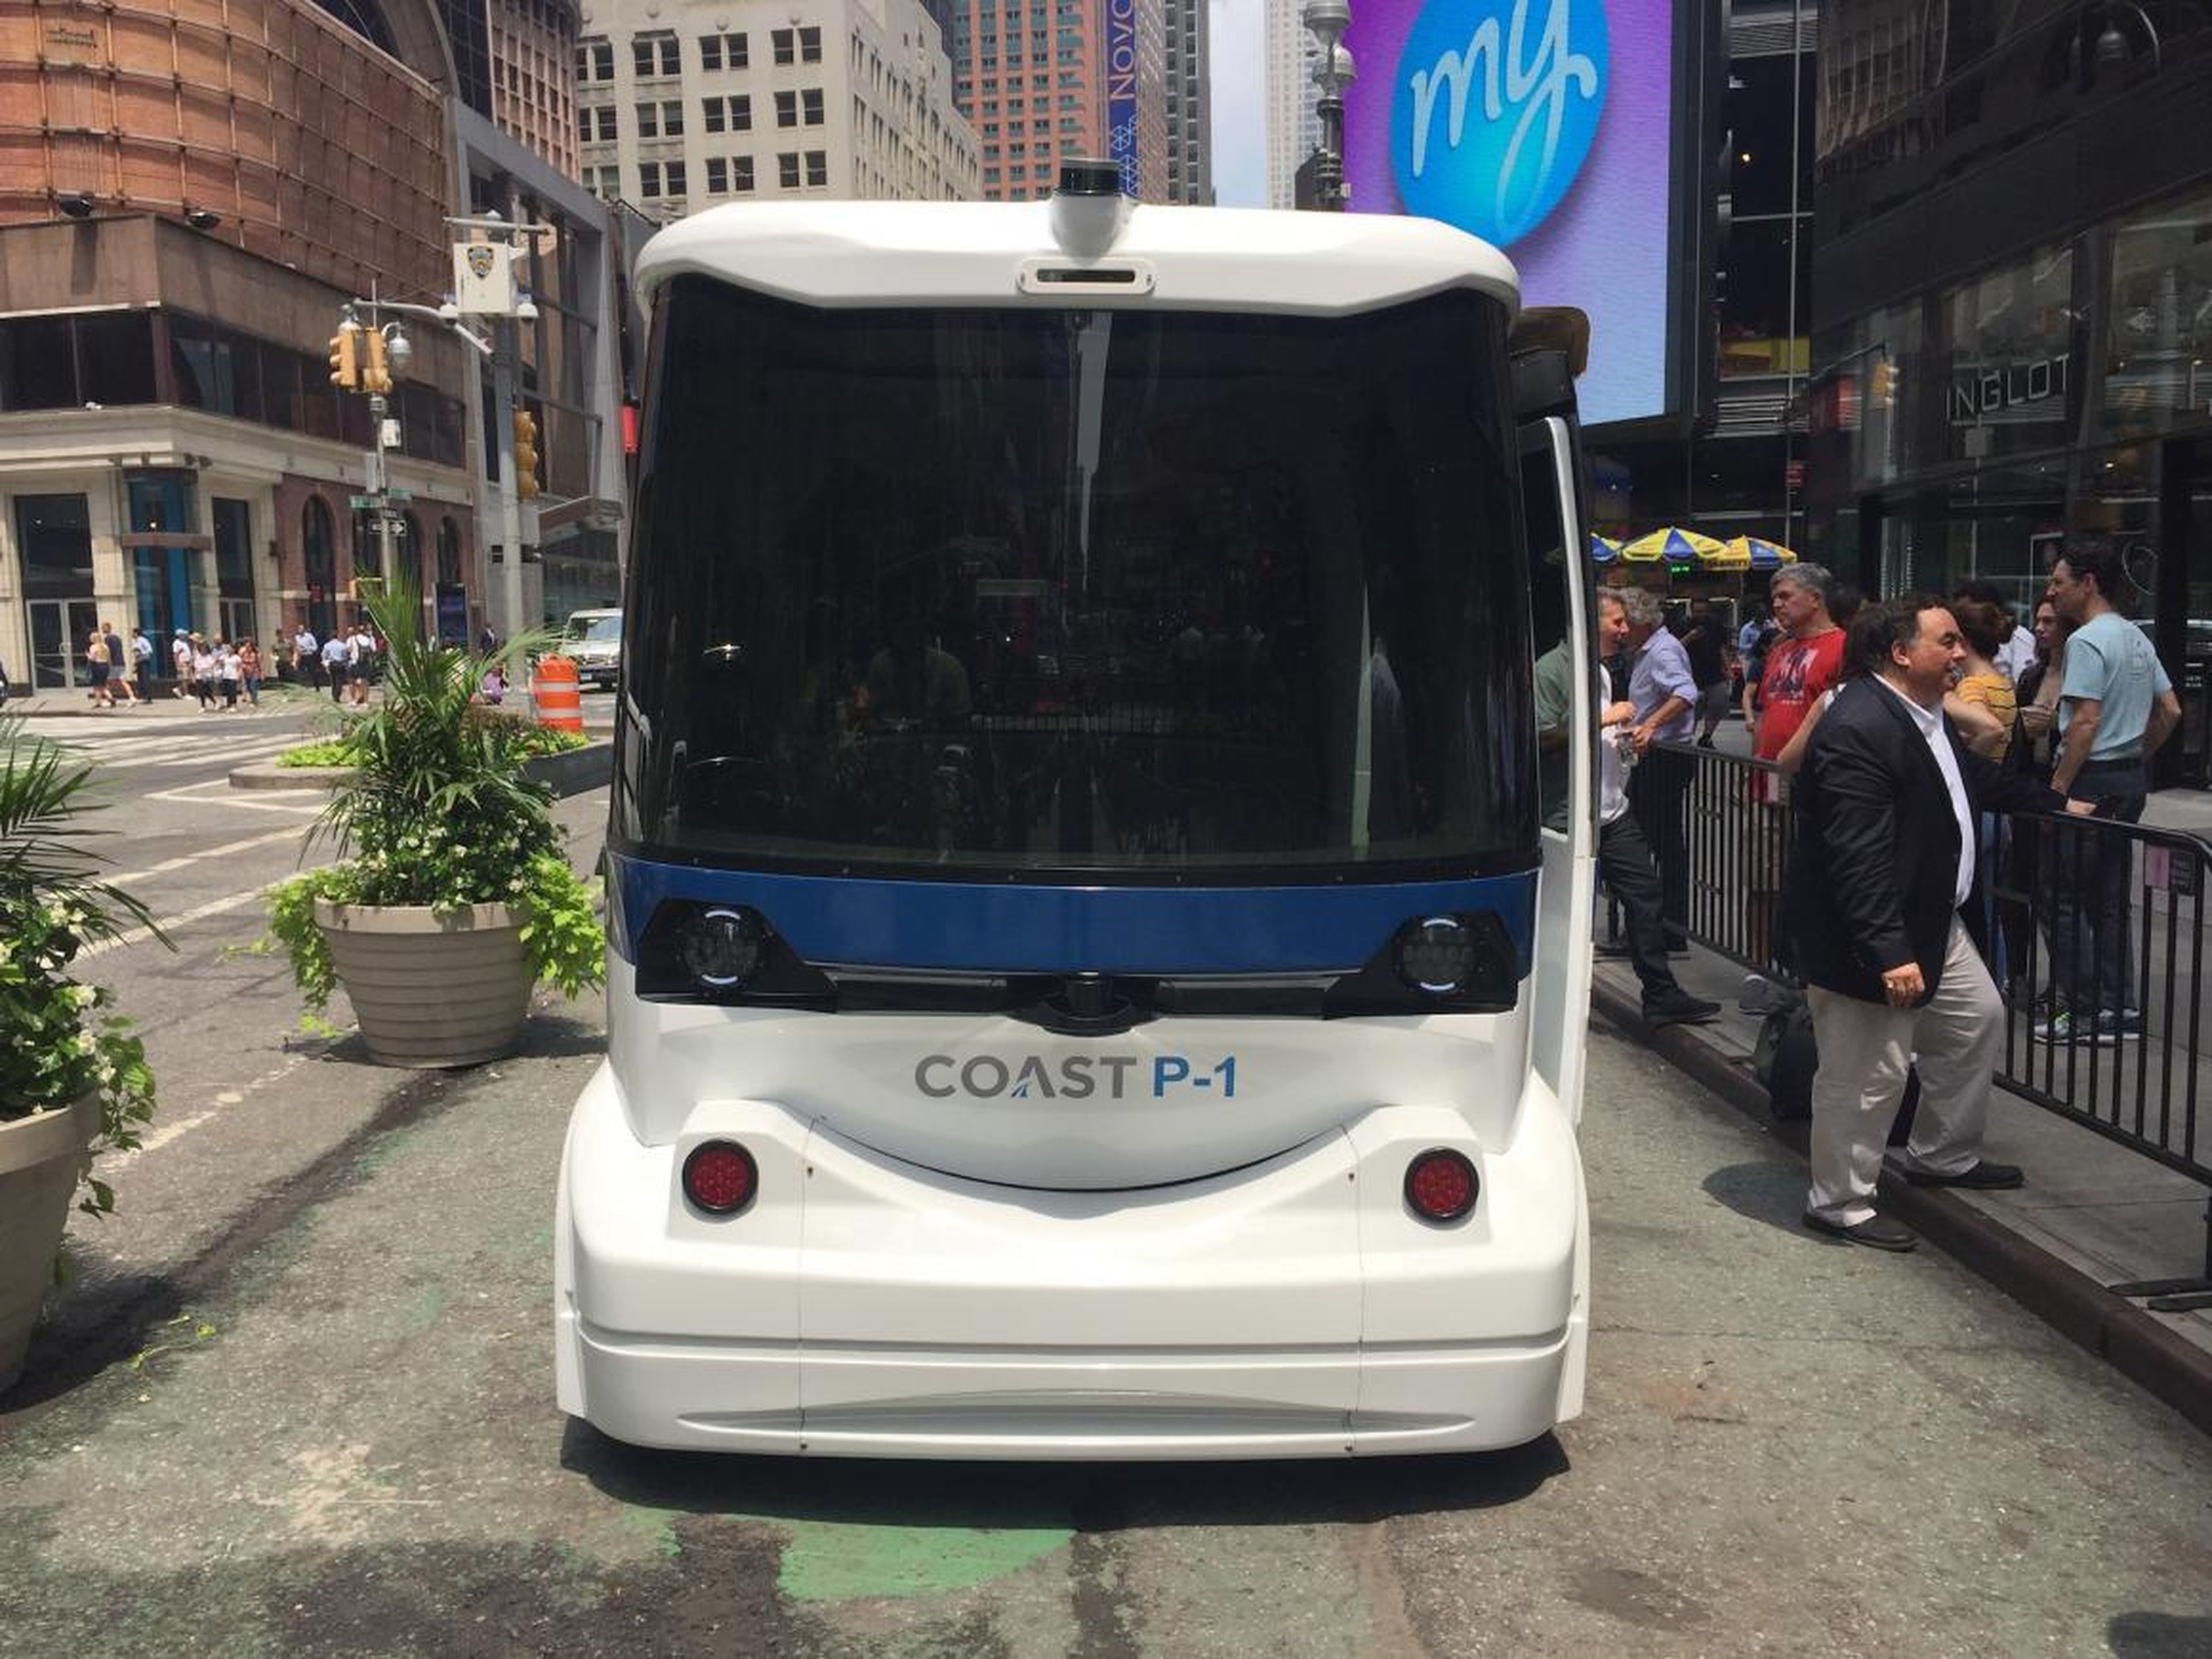 The Coast P-1 can either travel to predetermined stops or be hailed by users through an app.